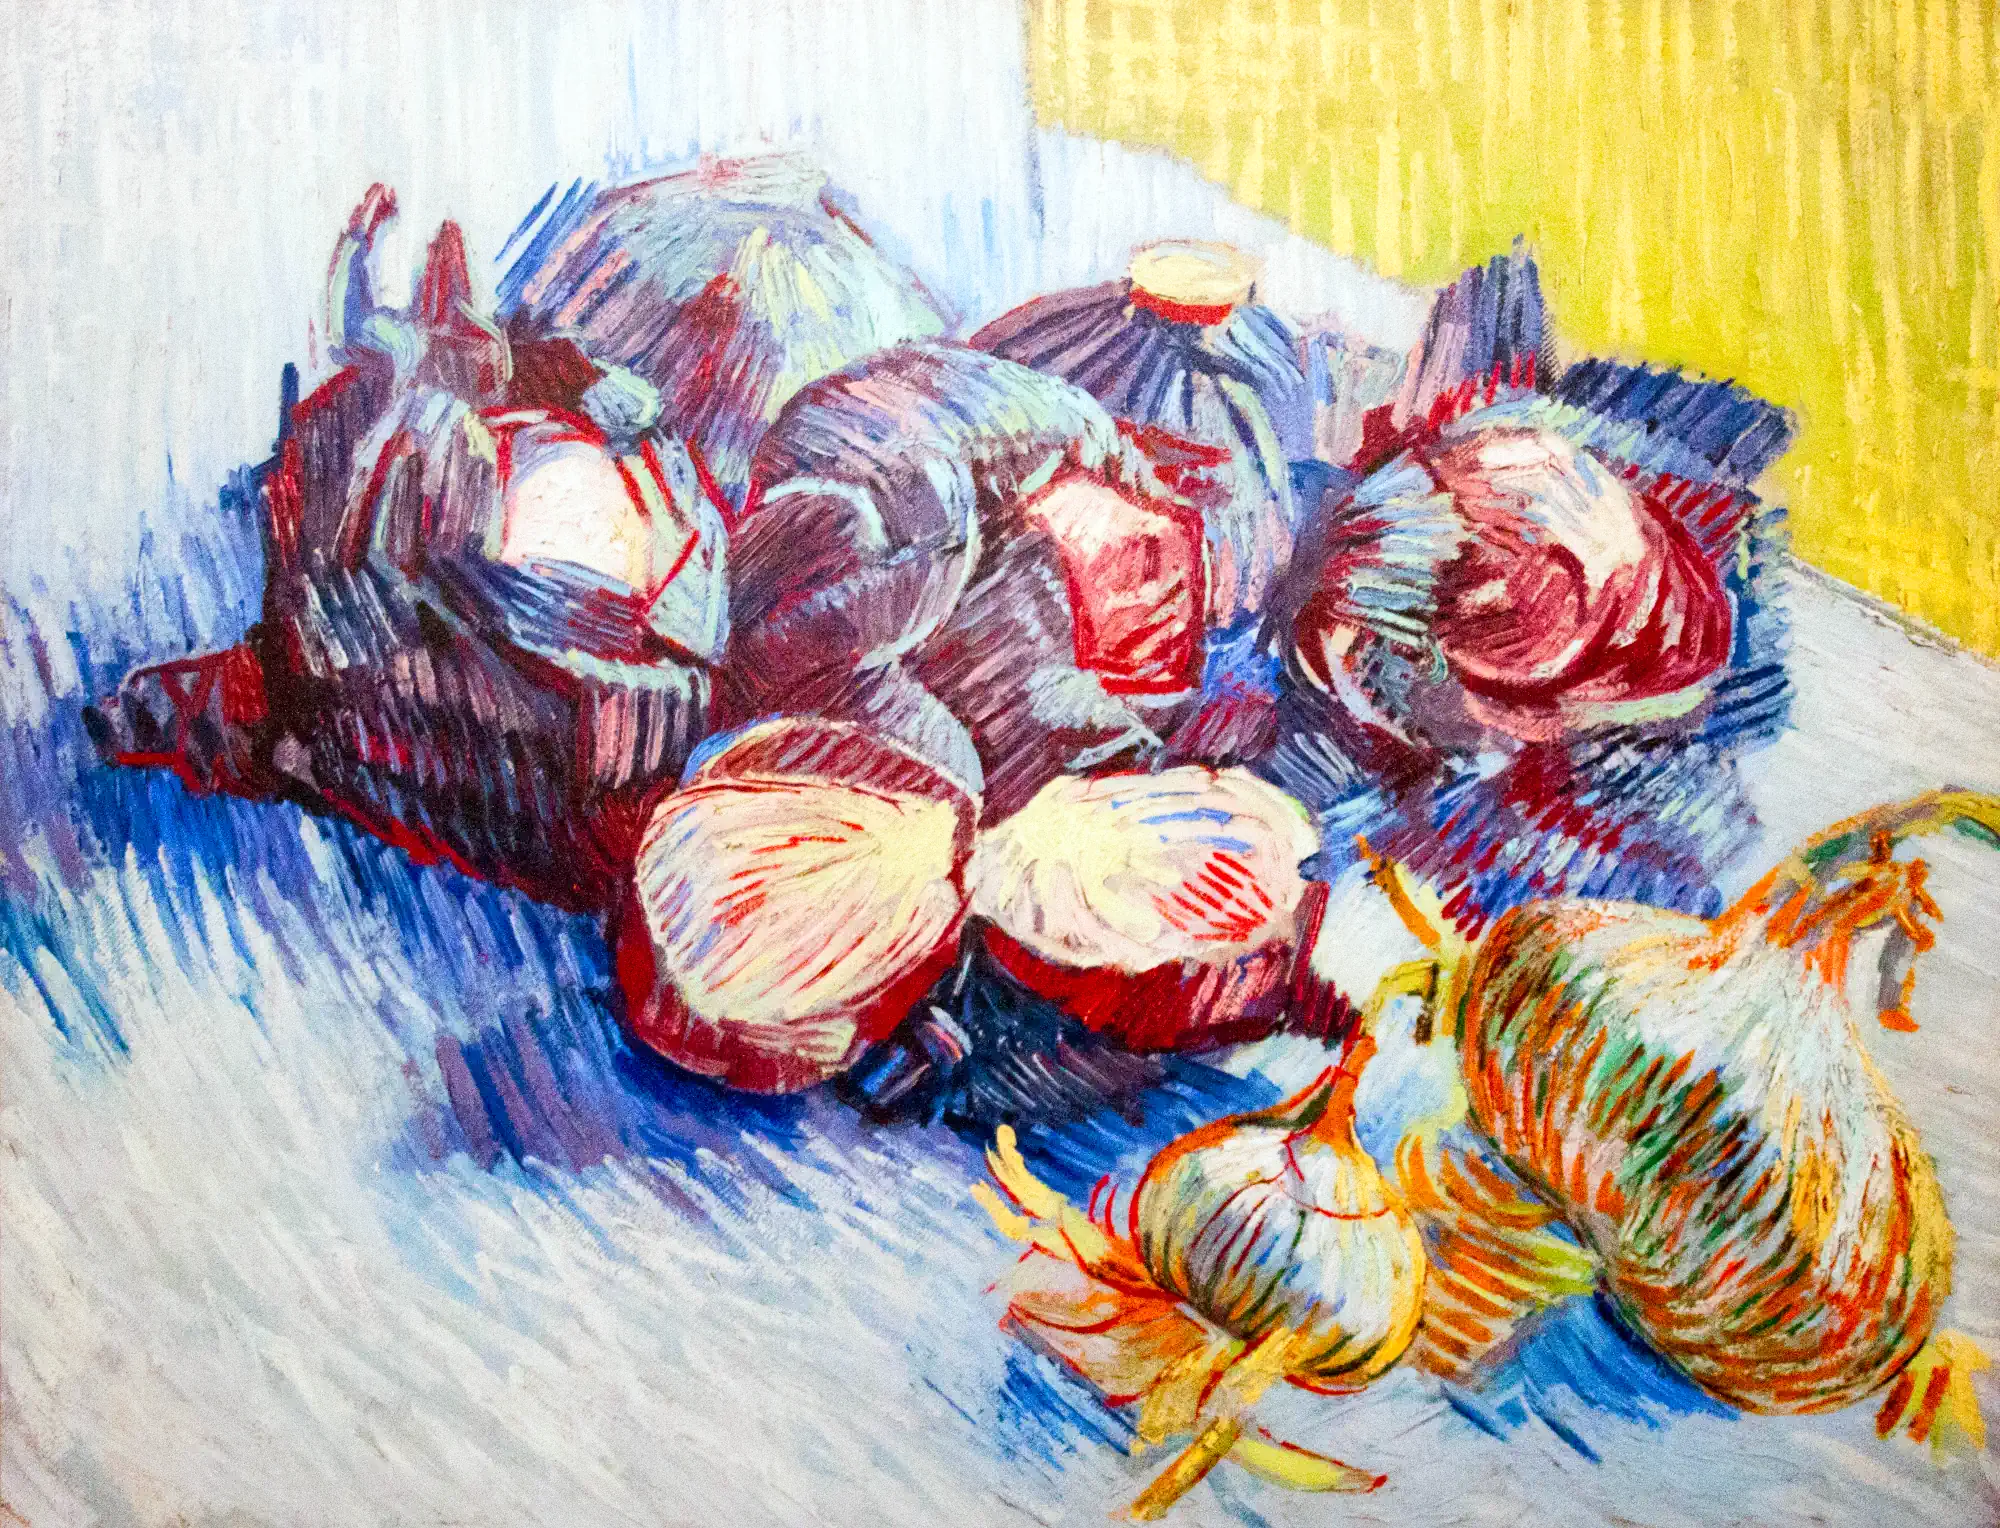 An image of red onions in front of a pastel white background. Painted with broad brushstrokes.